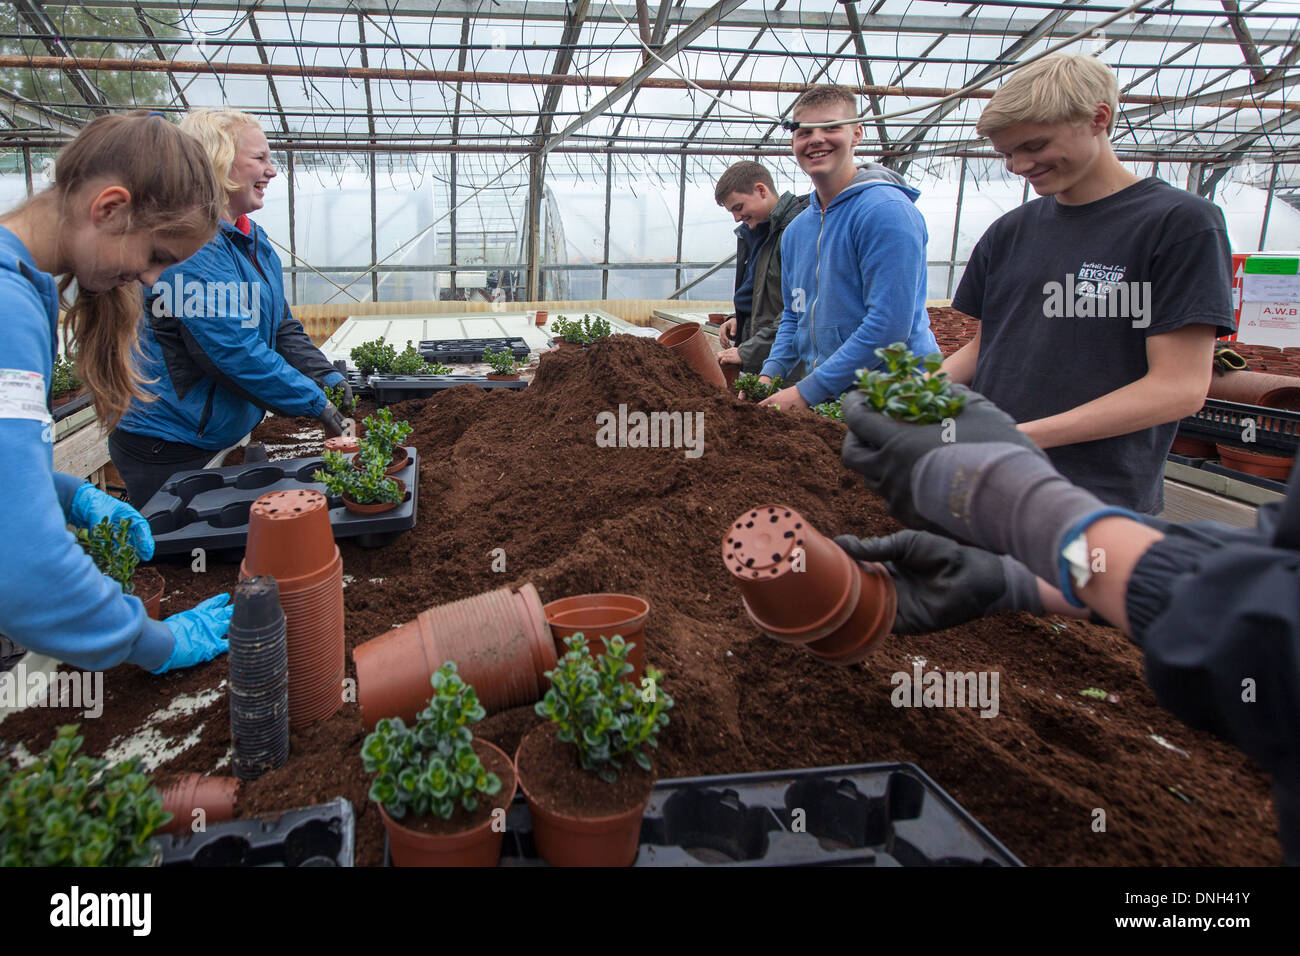 TEENAGERS PUTTING FLOWERS IN POTS IN A GREENHOUSE, GEOTHERMAL ZONE OF HVERAGERDI, SOUTHERN ICELAND, EUROPE Stock Photo